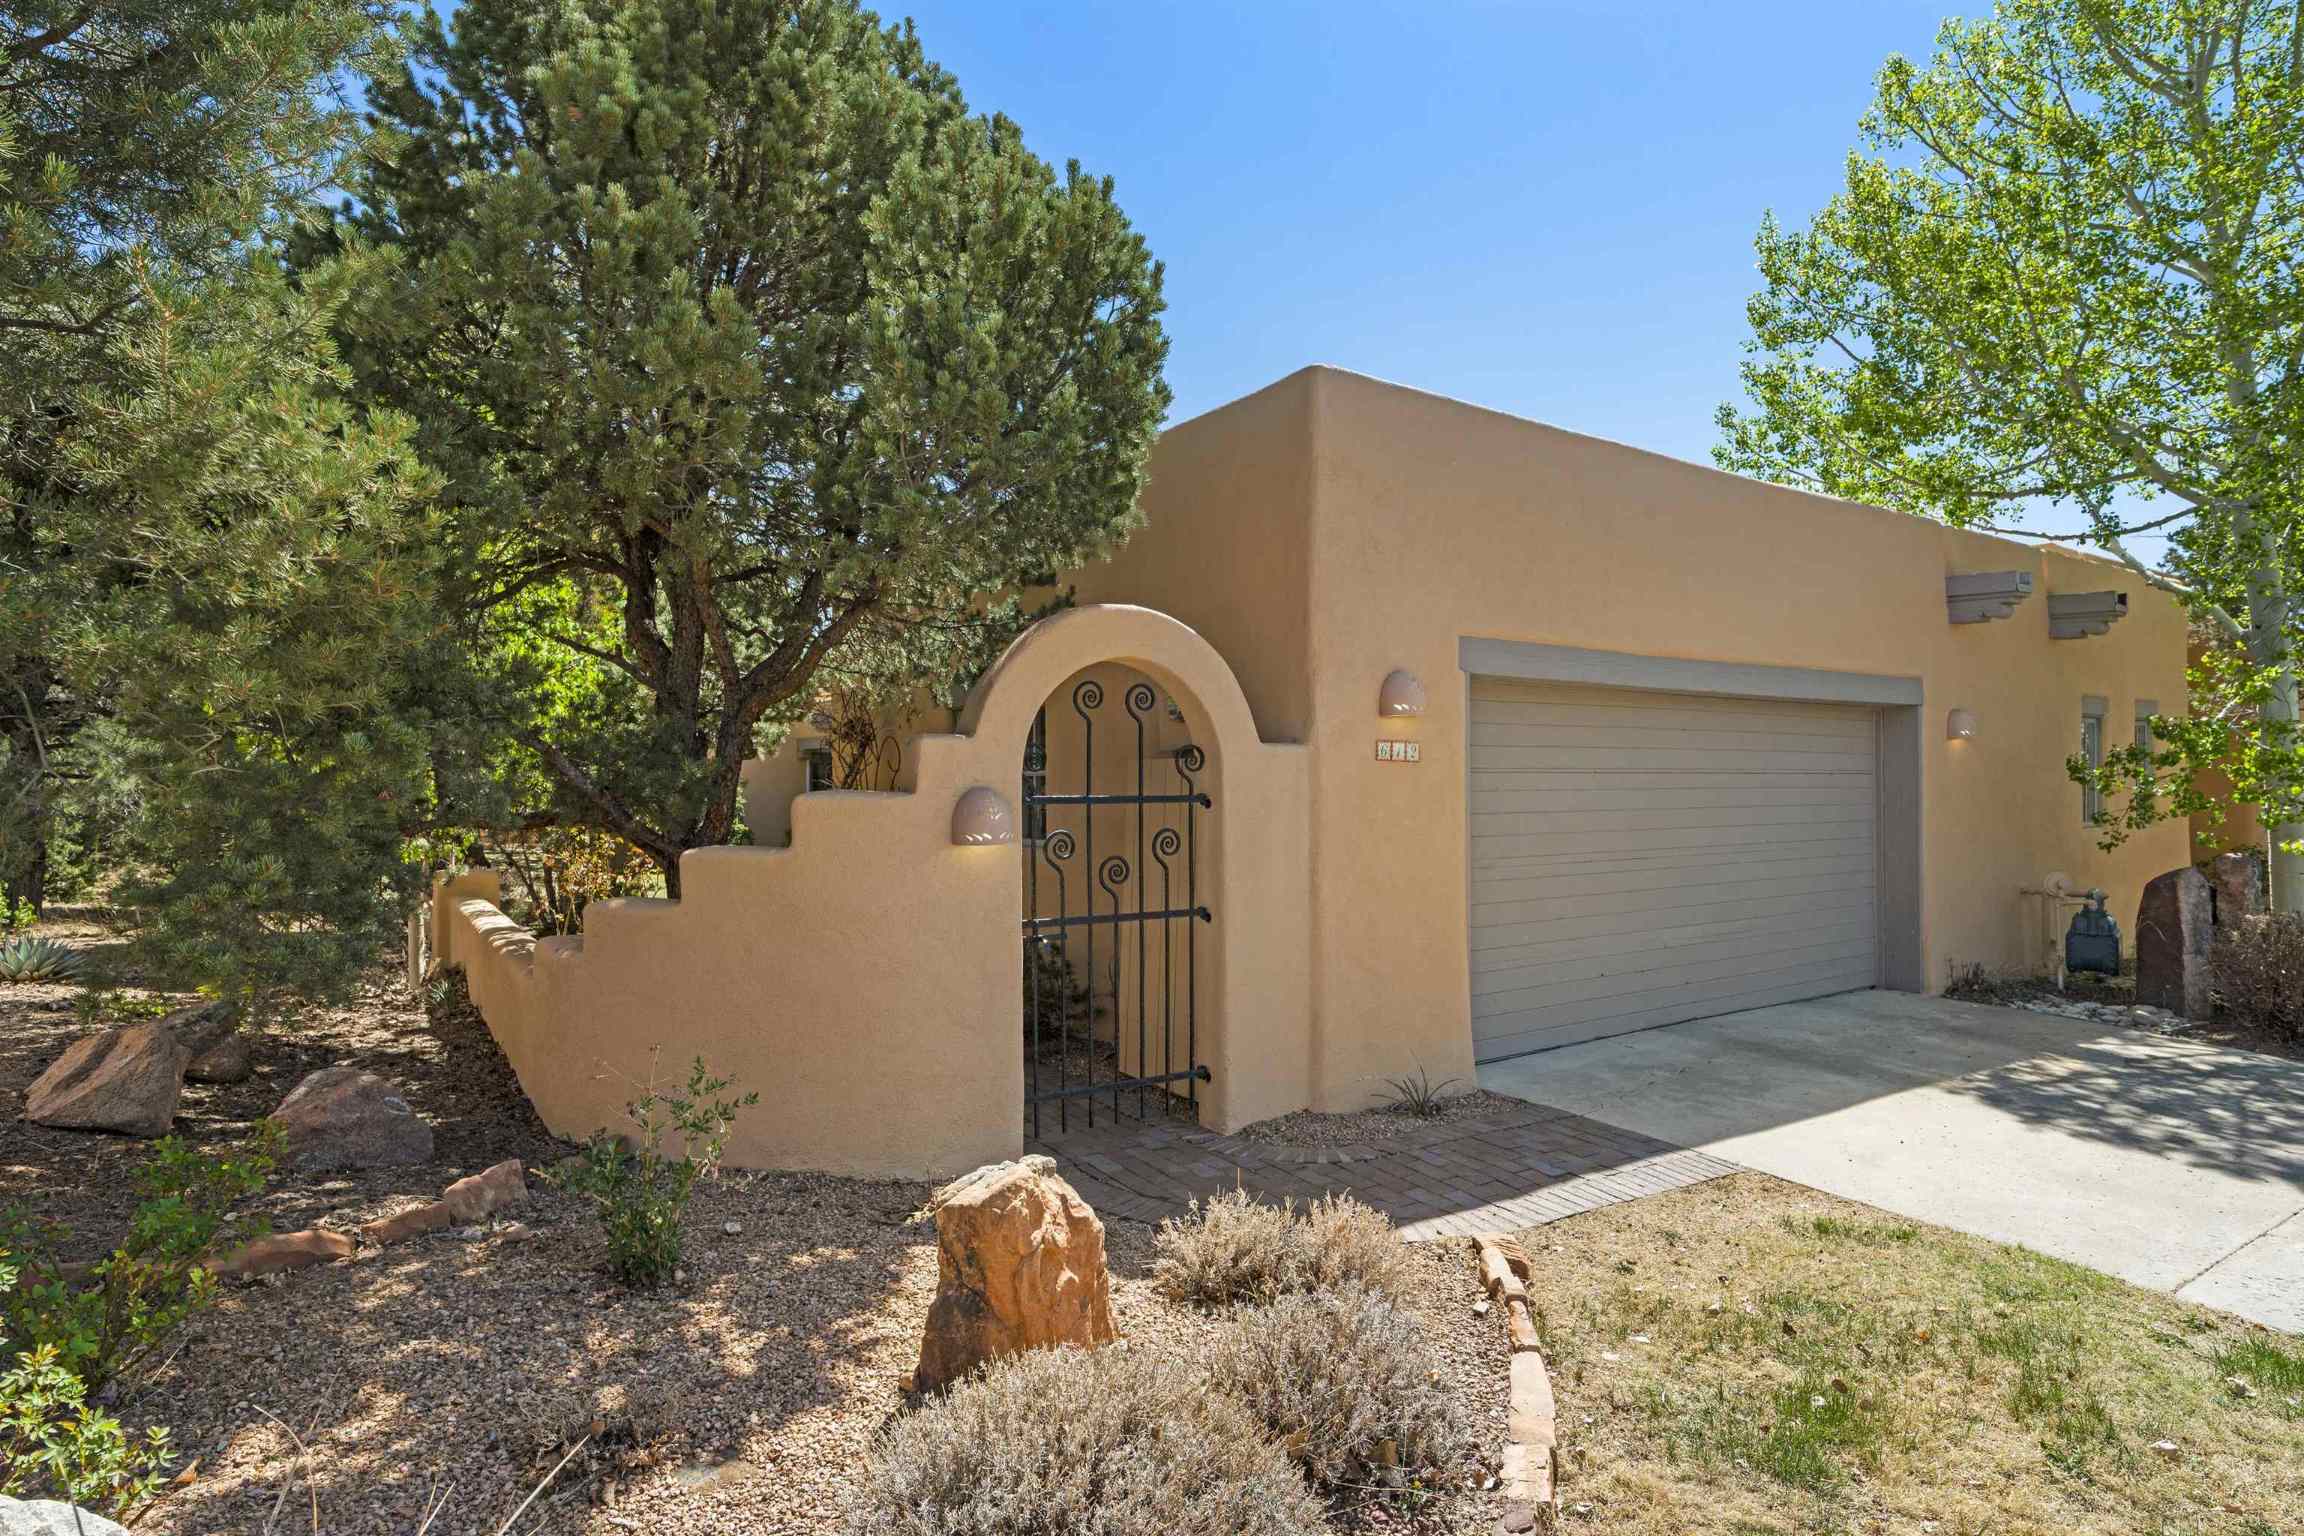 3101 Old Pecos Trail #612, Santa Fe, New Mexico 87505, 3 Bedrooms Bedrooms, ,4 BathroomsBathrooms,Residential,For Sale,3101 Old Pecos Trail #612,202201567